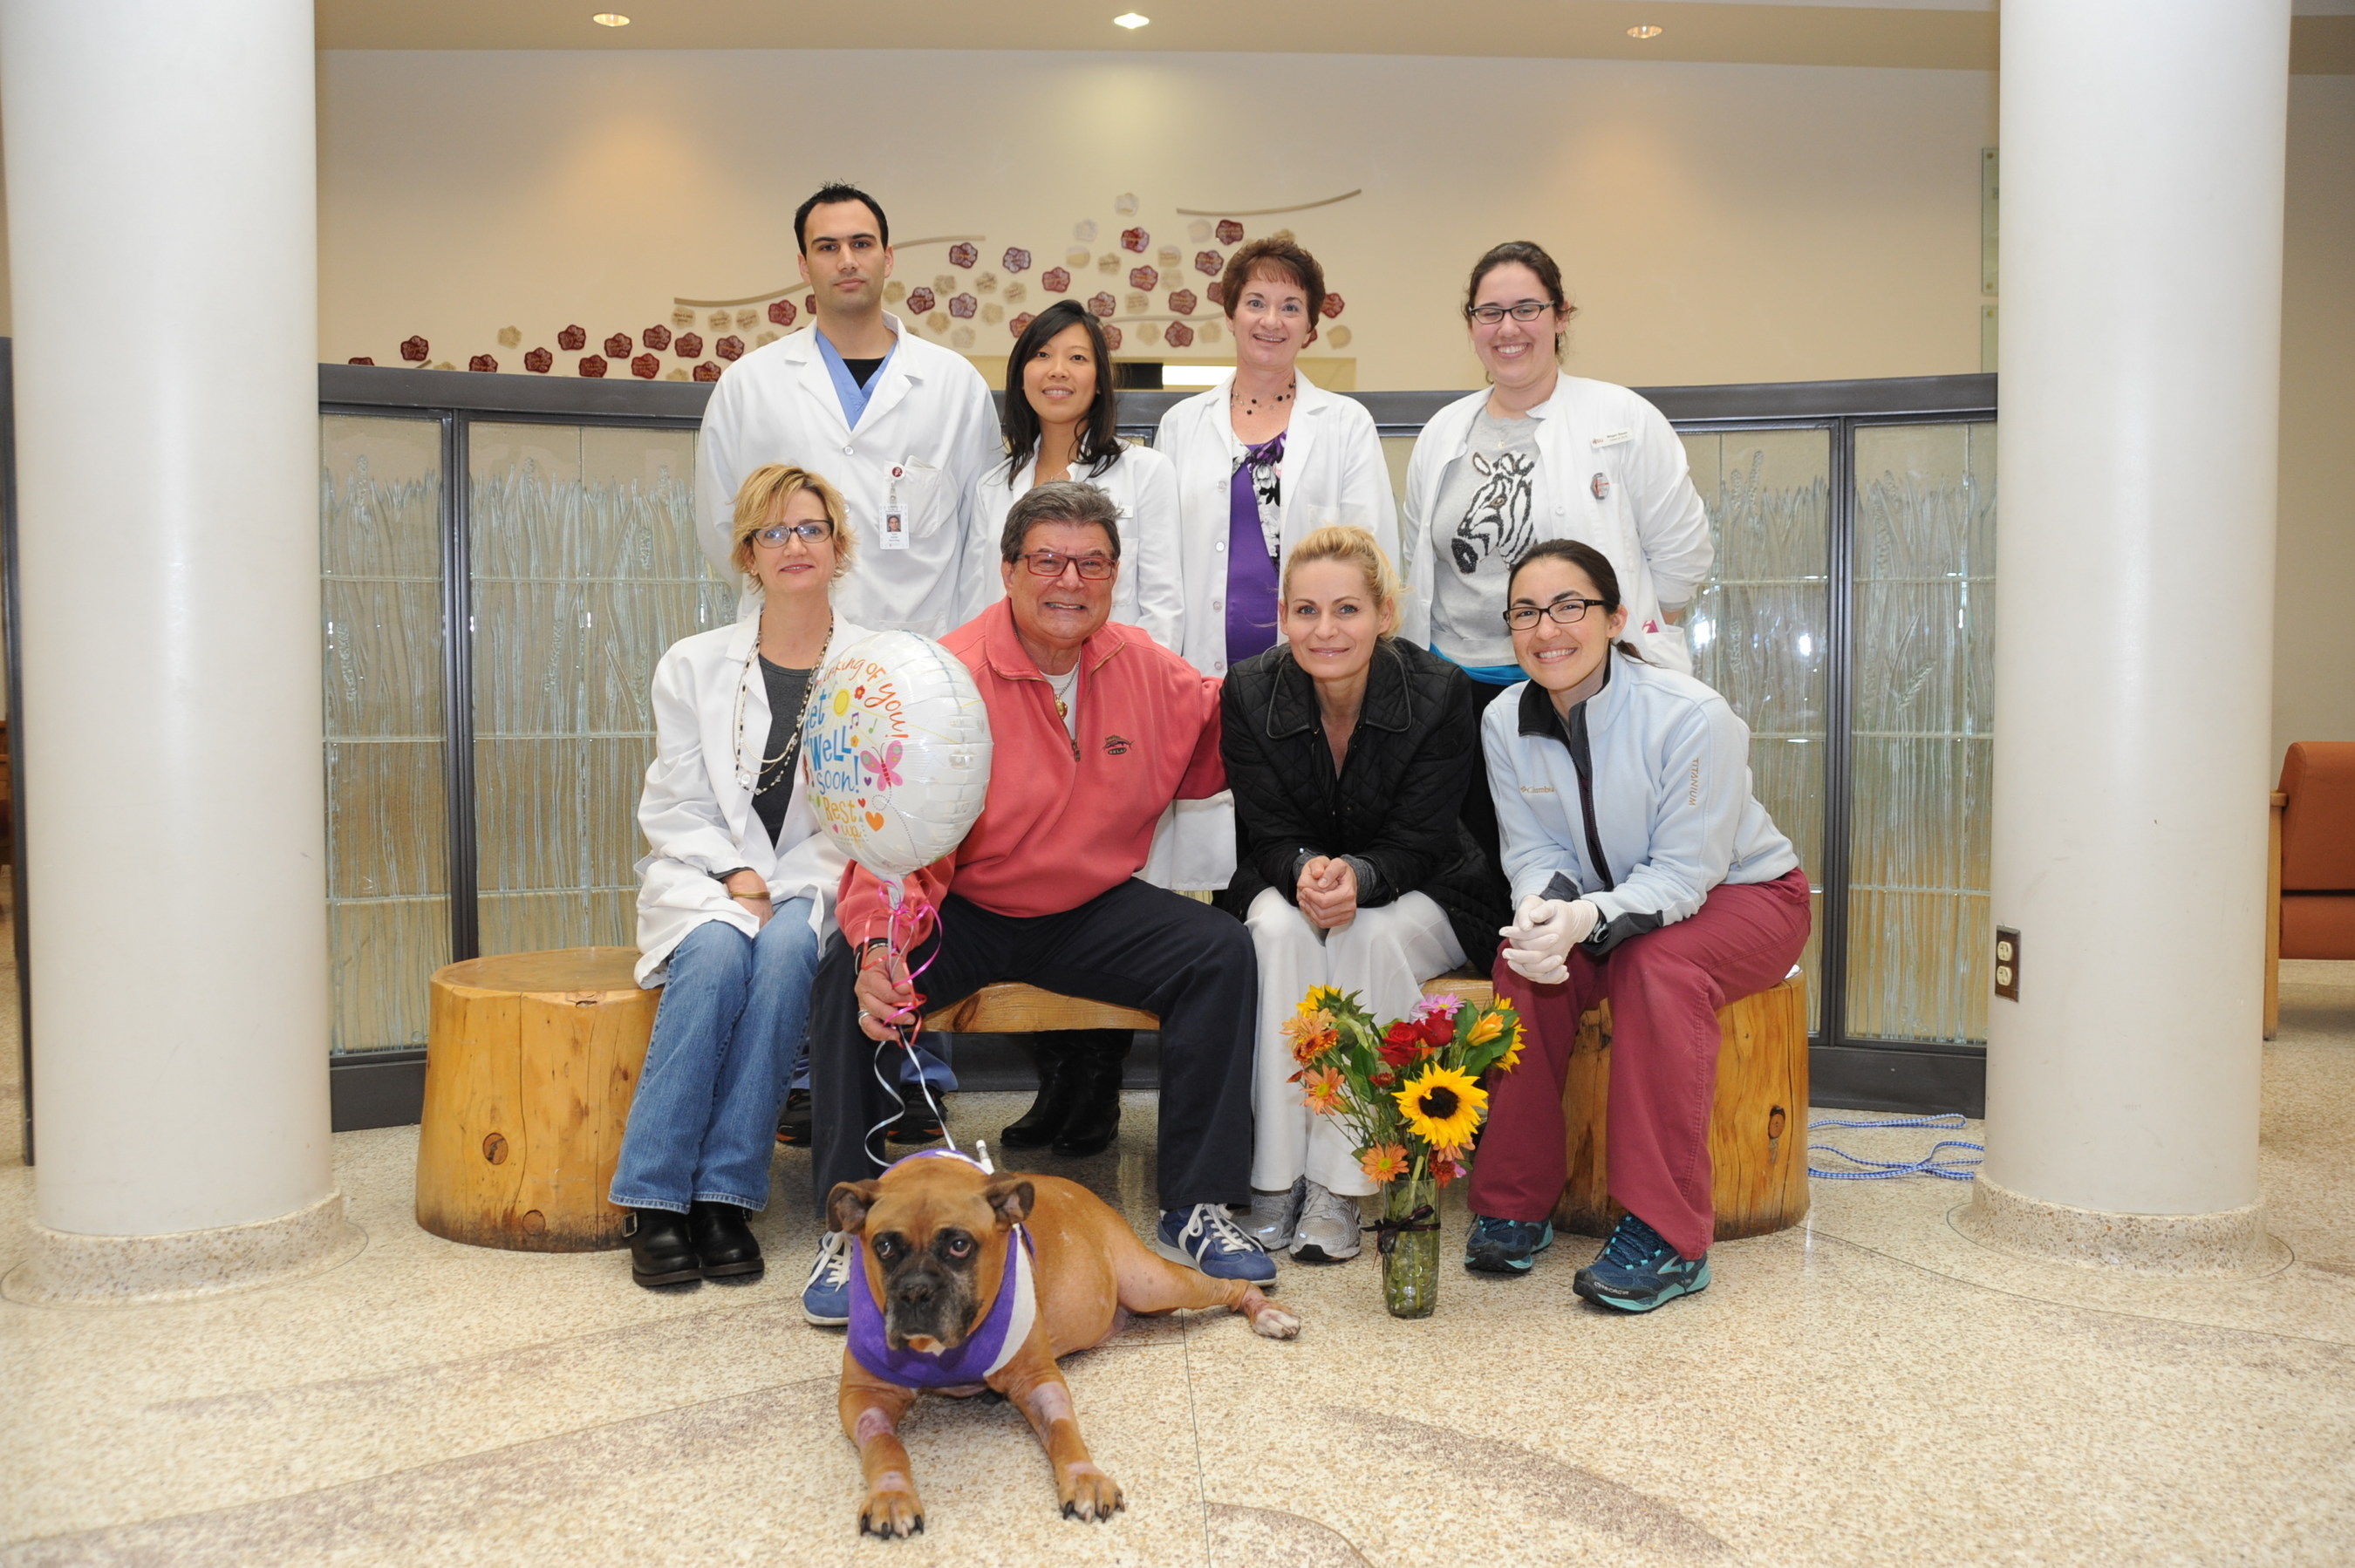 The Washington State University College of Veterinary Medicine Pituitary Team poses for a photo with Boxer Anna, her guardian Sundays Hunt and American Dog Rescue Founder Arthur E. Benjamin  Front Row: Anna (First TSH patient at WSU) Second Row (From left to right): Tina Owen, Arthur Benjamin, Sundays Hunt, Abby Thomson (4th year veterinary student) Third Row (From left to right): Tom Jukier (Neurology intern), Annie Chen-Allen, Linda Martin, Megan Bauer (4th year veterinary student)